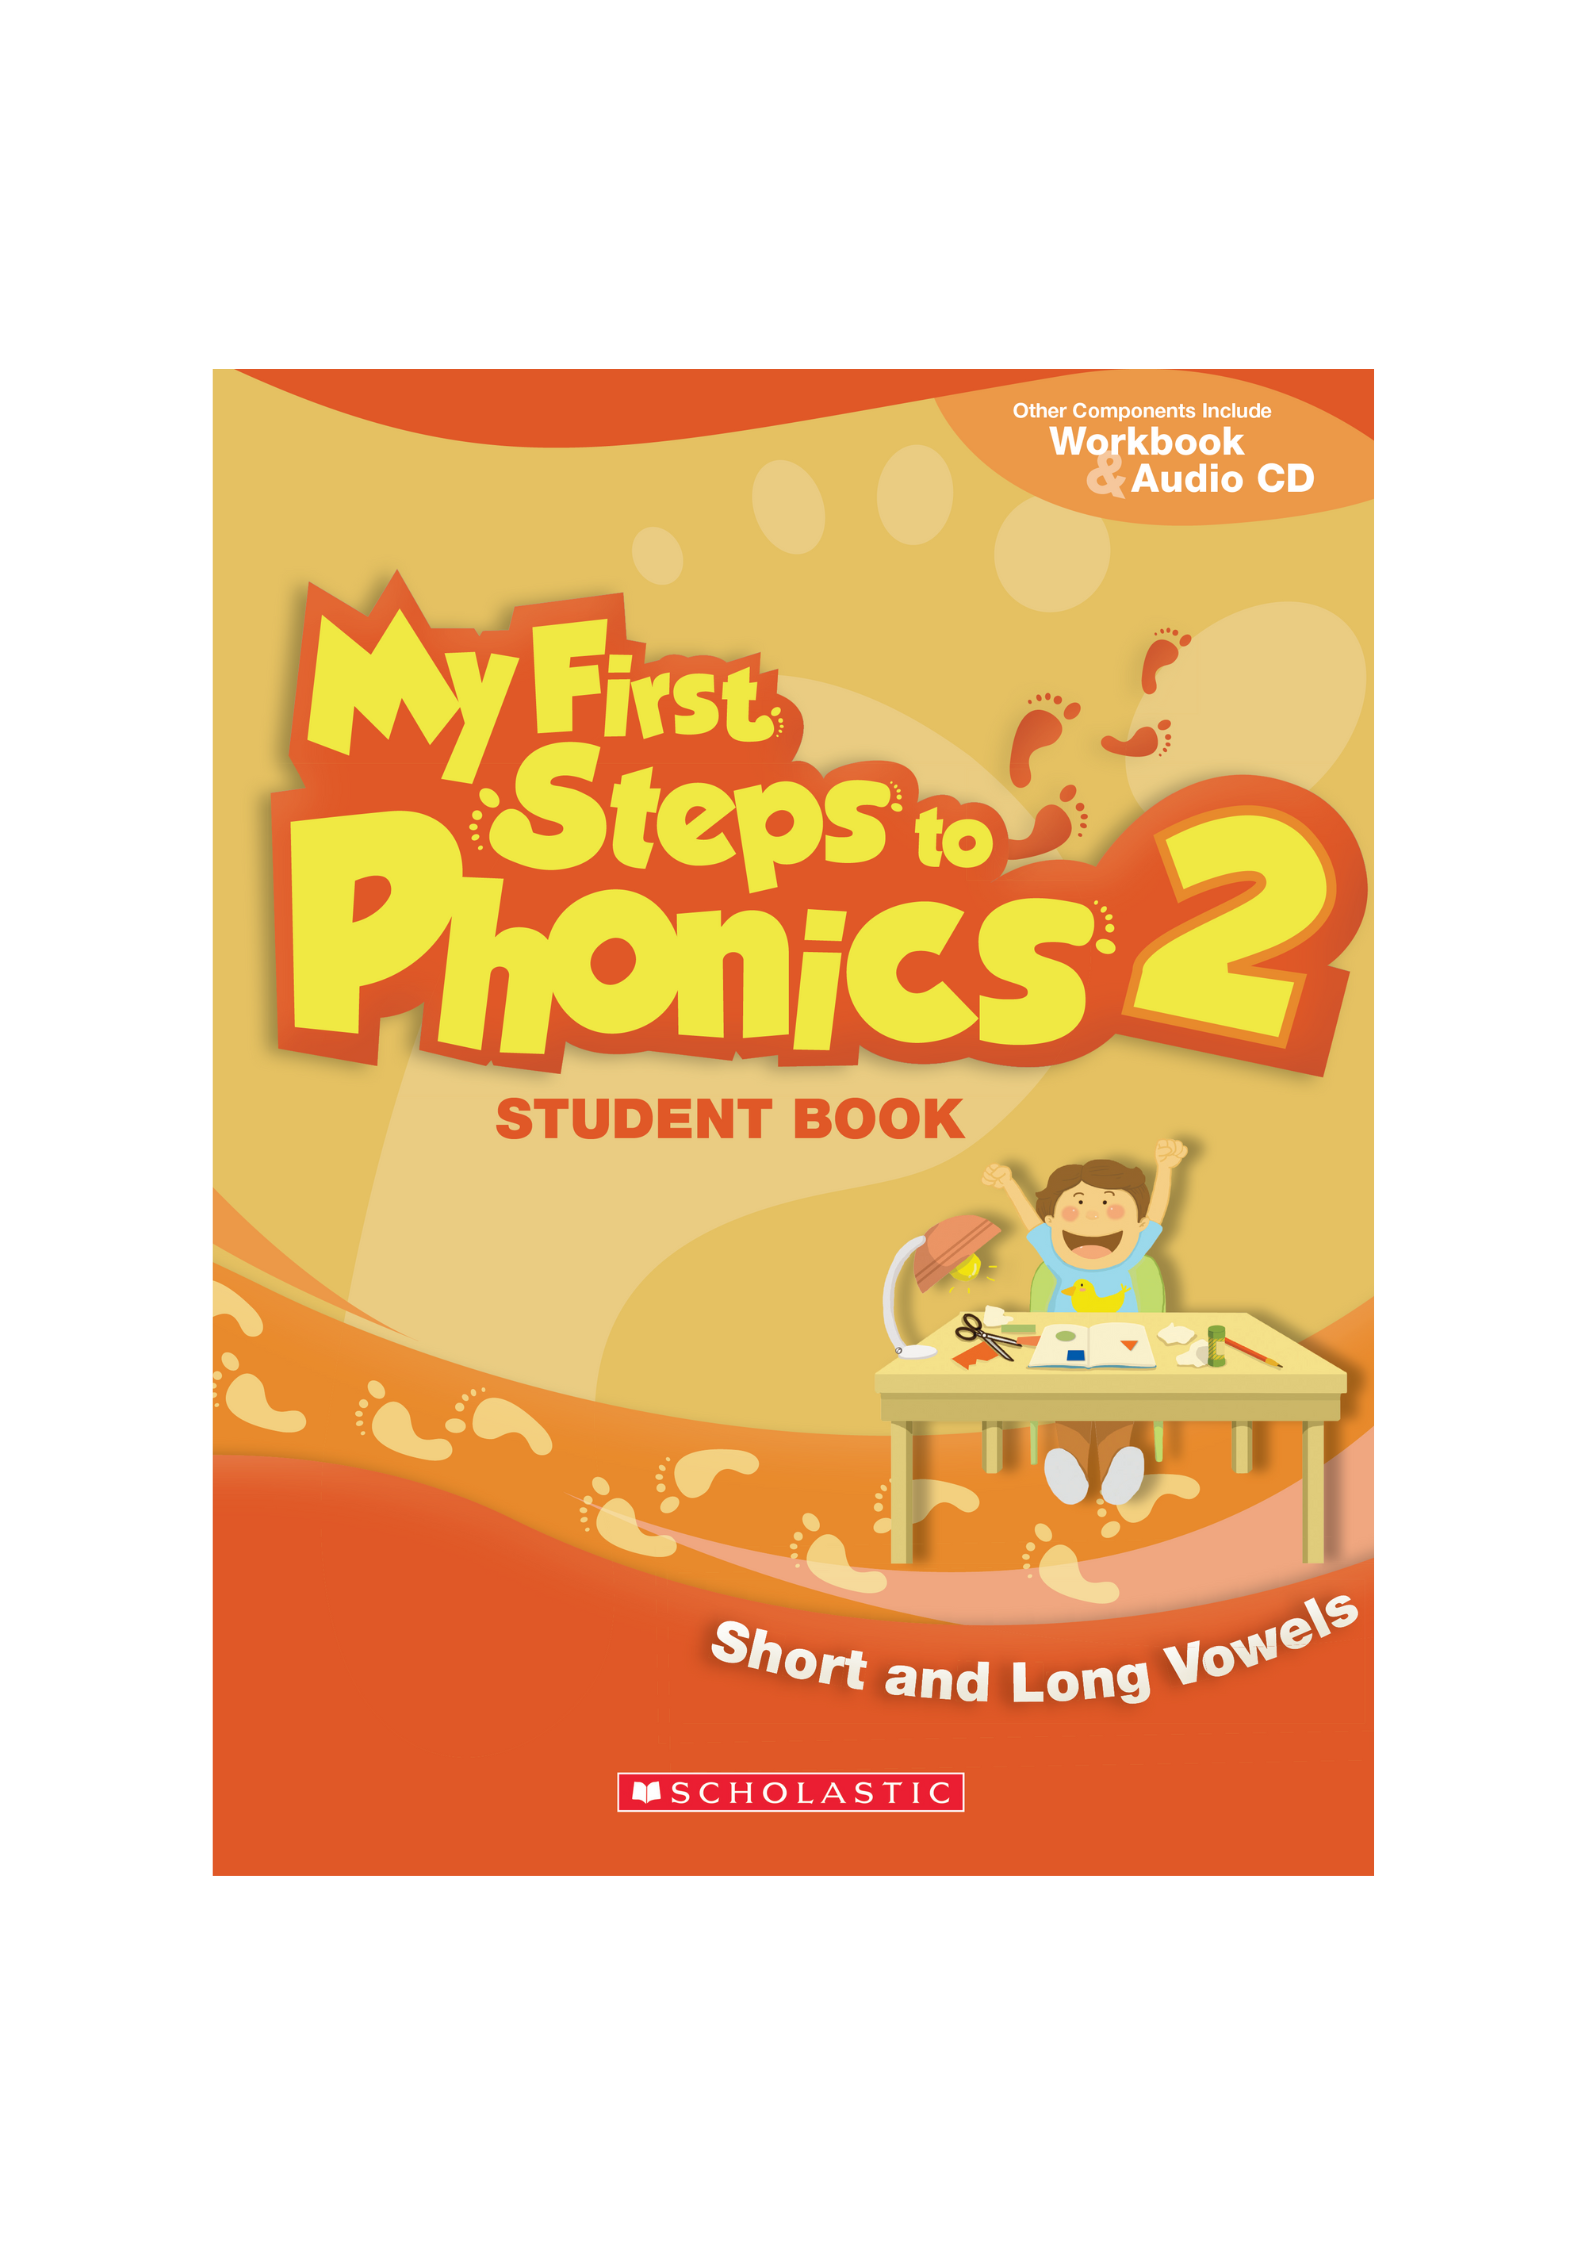 My First Step to Phonics 2: Student Book